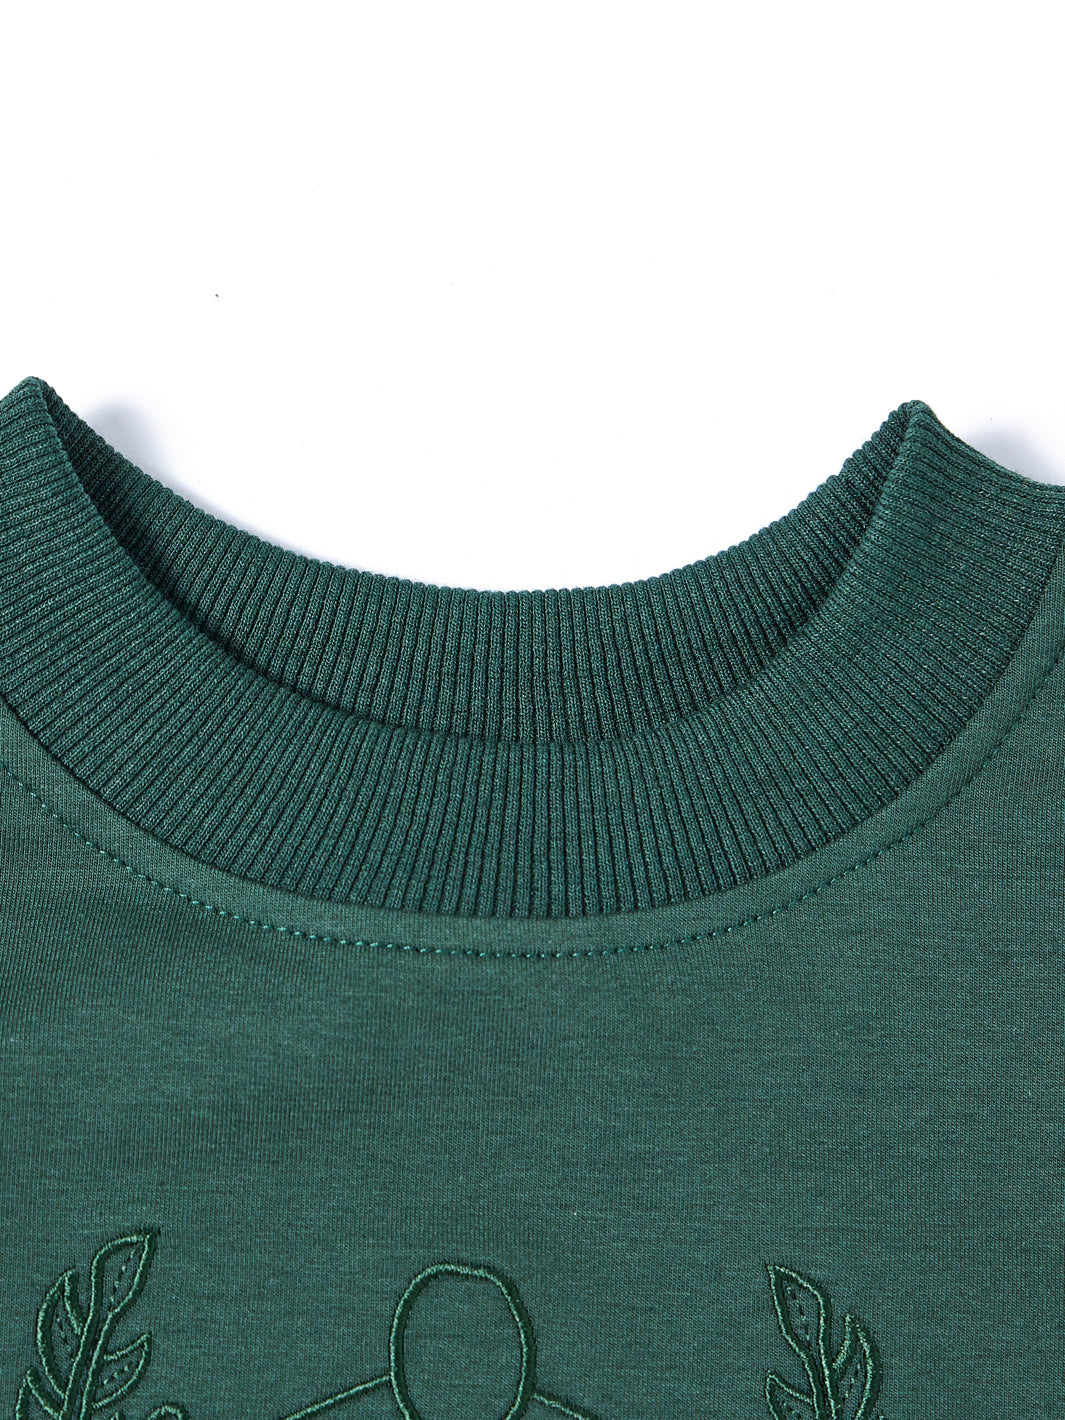 Front Embroidered Top - Dk. Green